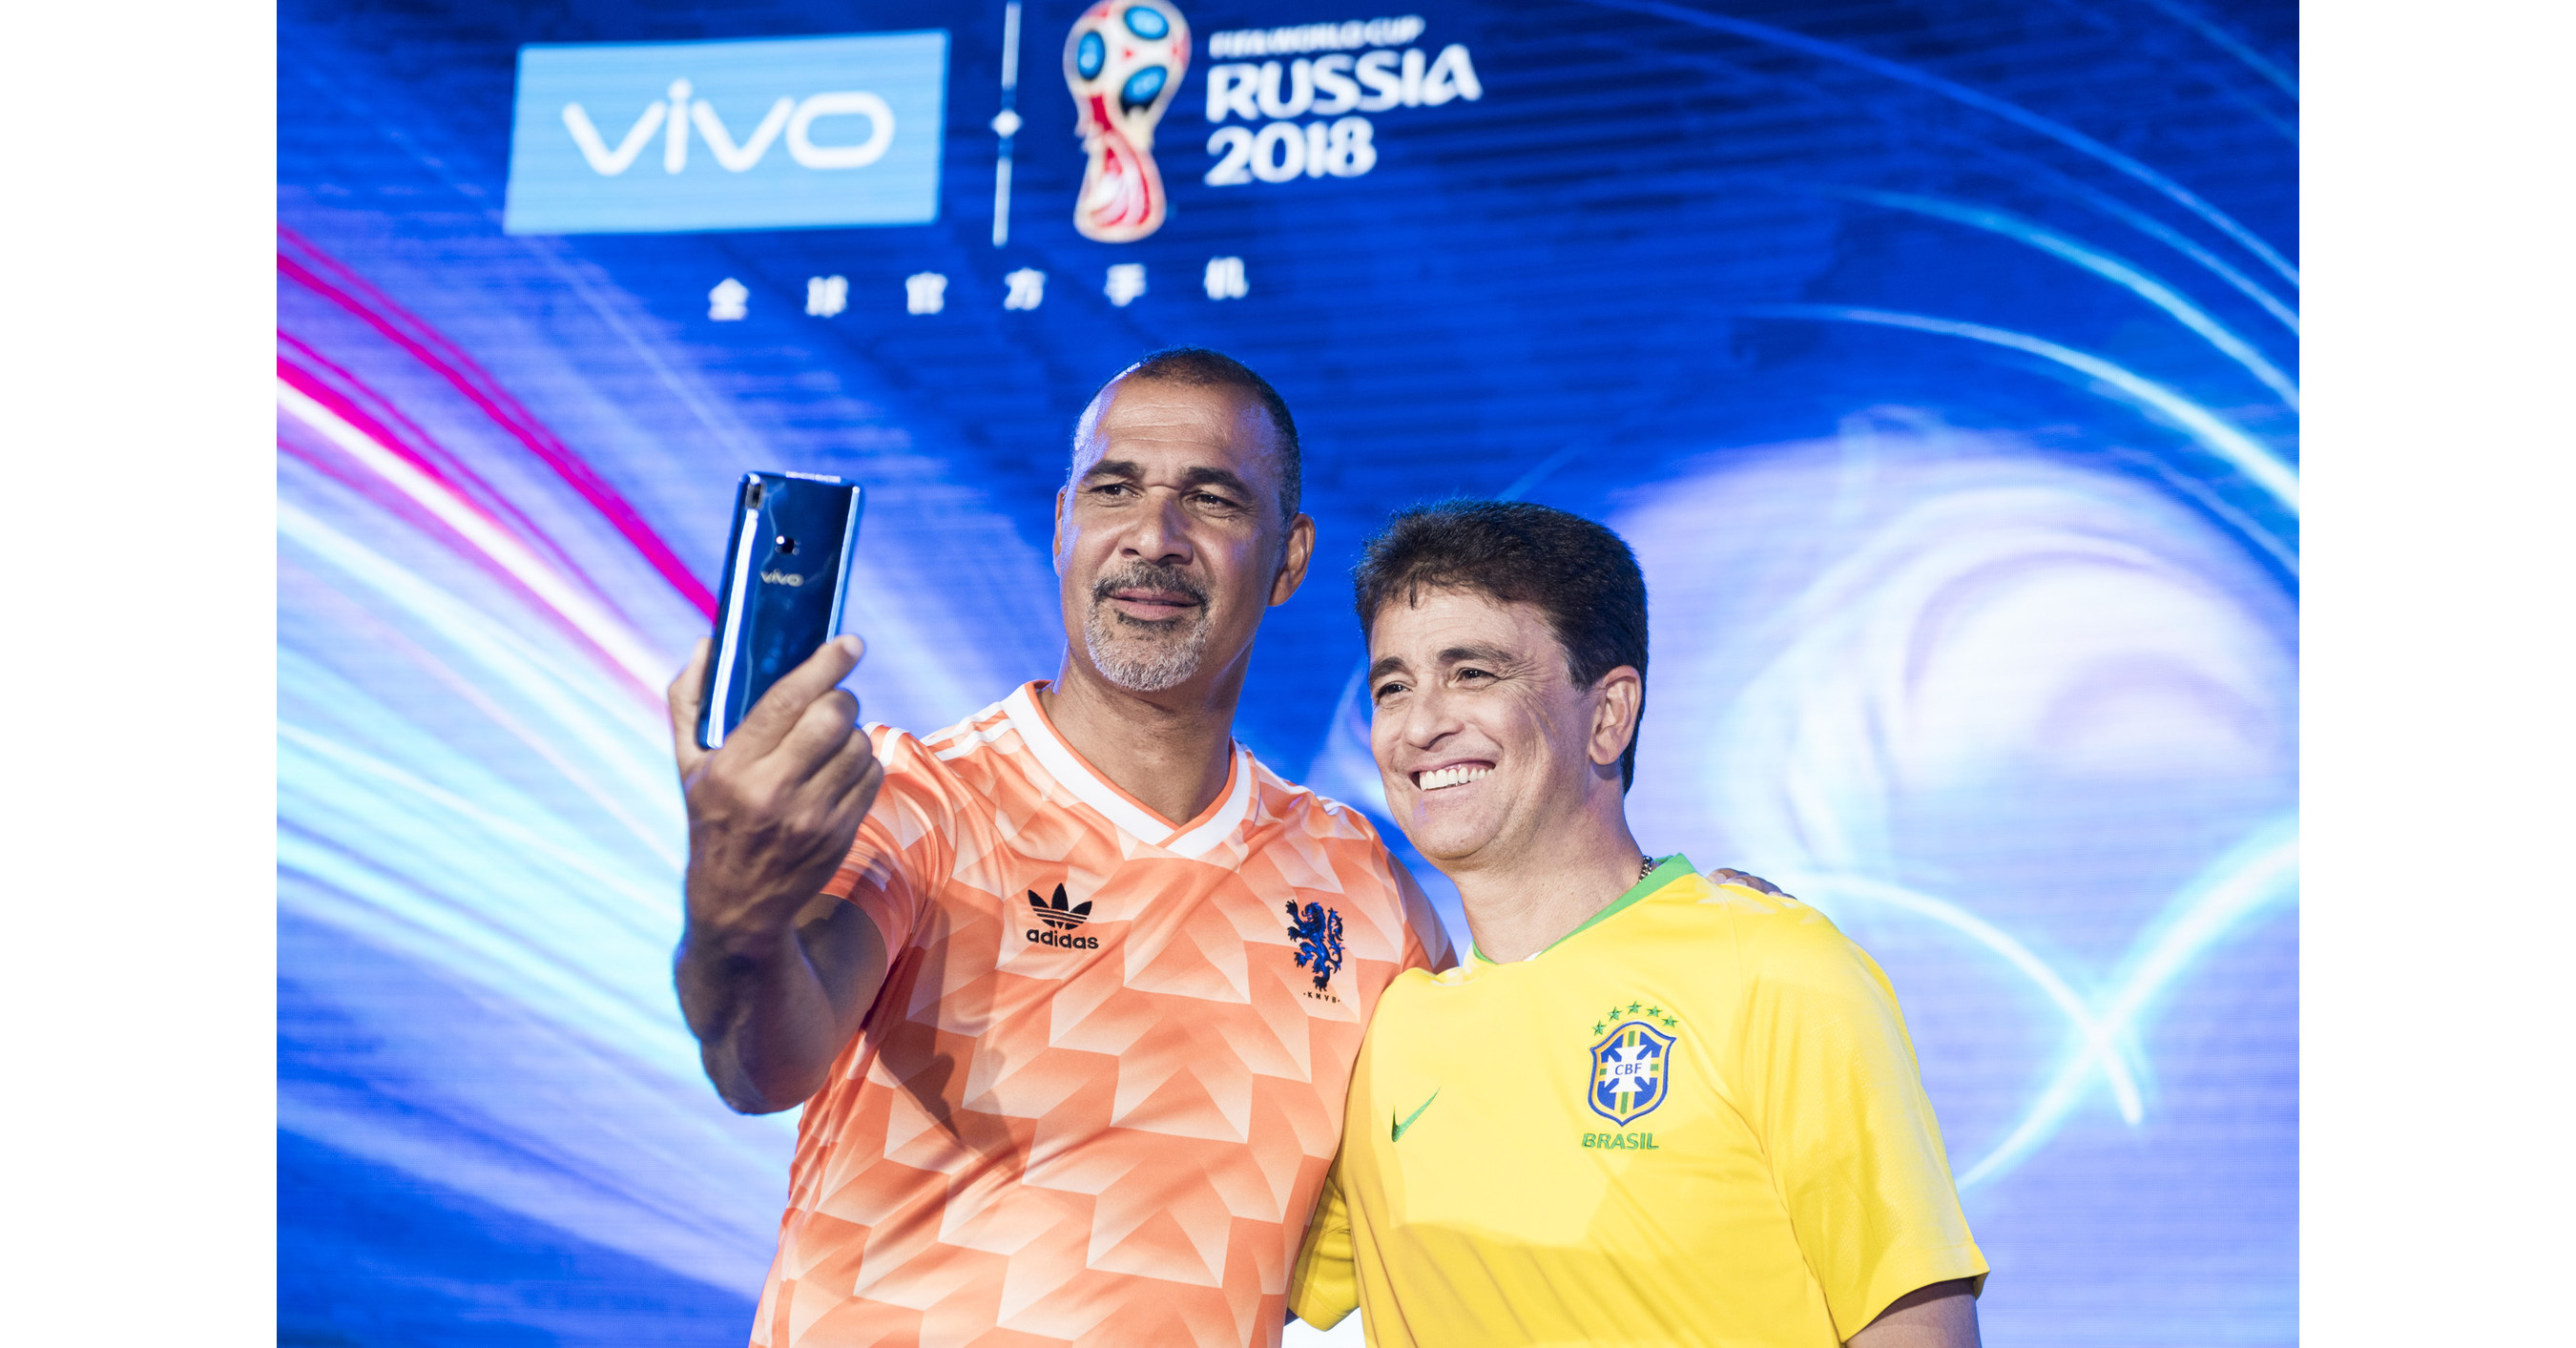 vivo Becomes the Official Sponsor and the Official Smartphone of the FIFA  World Cup Qatar 2022™